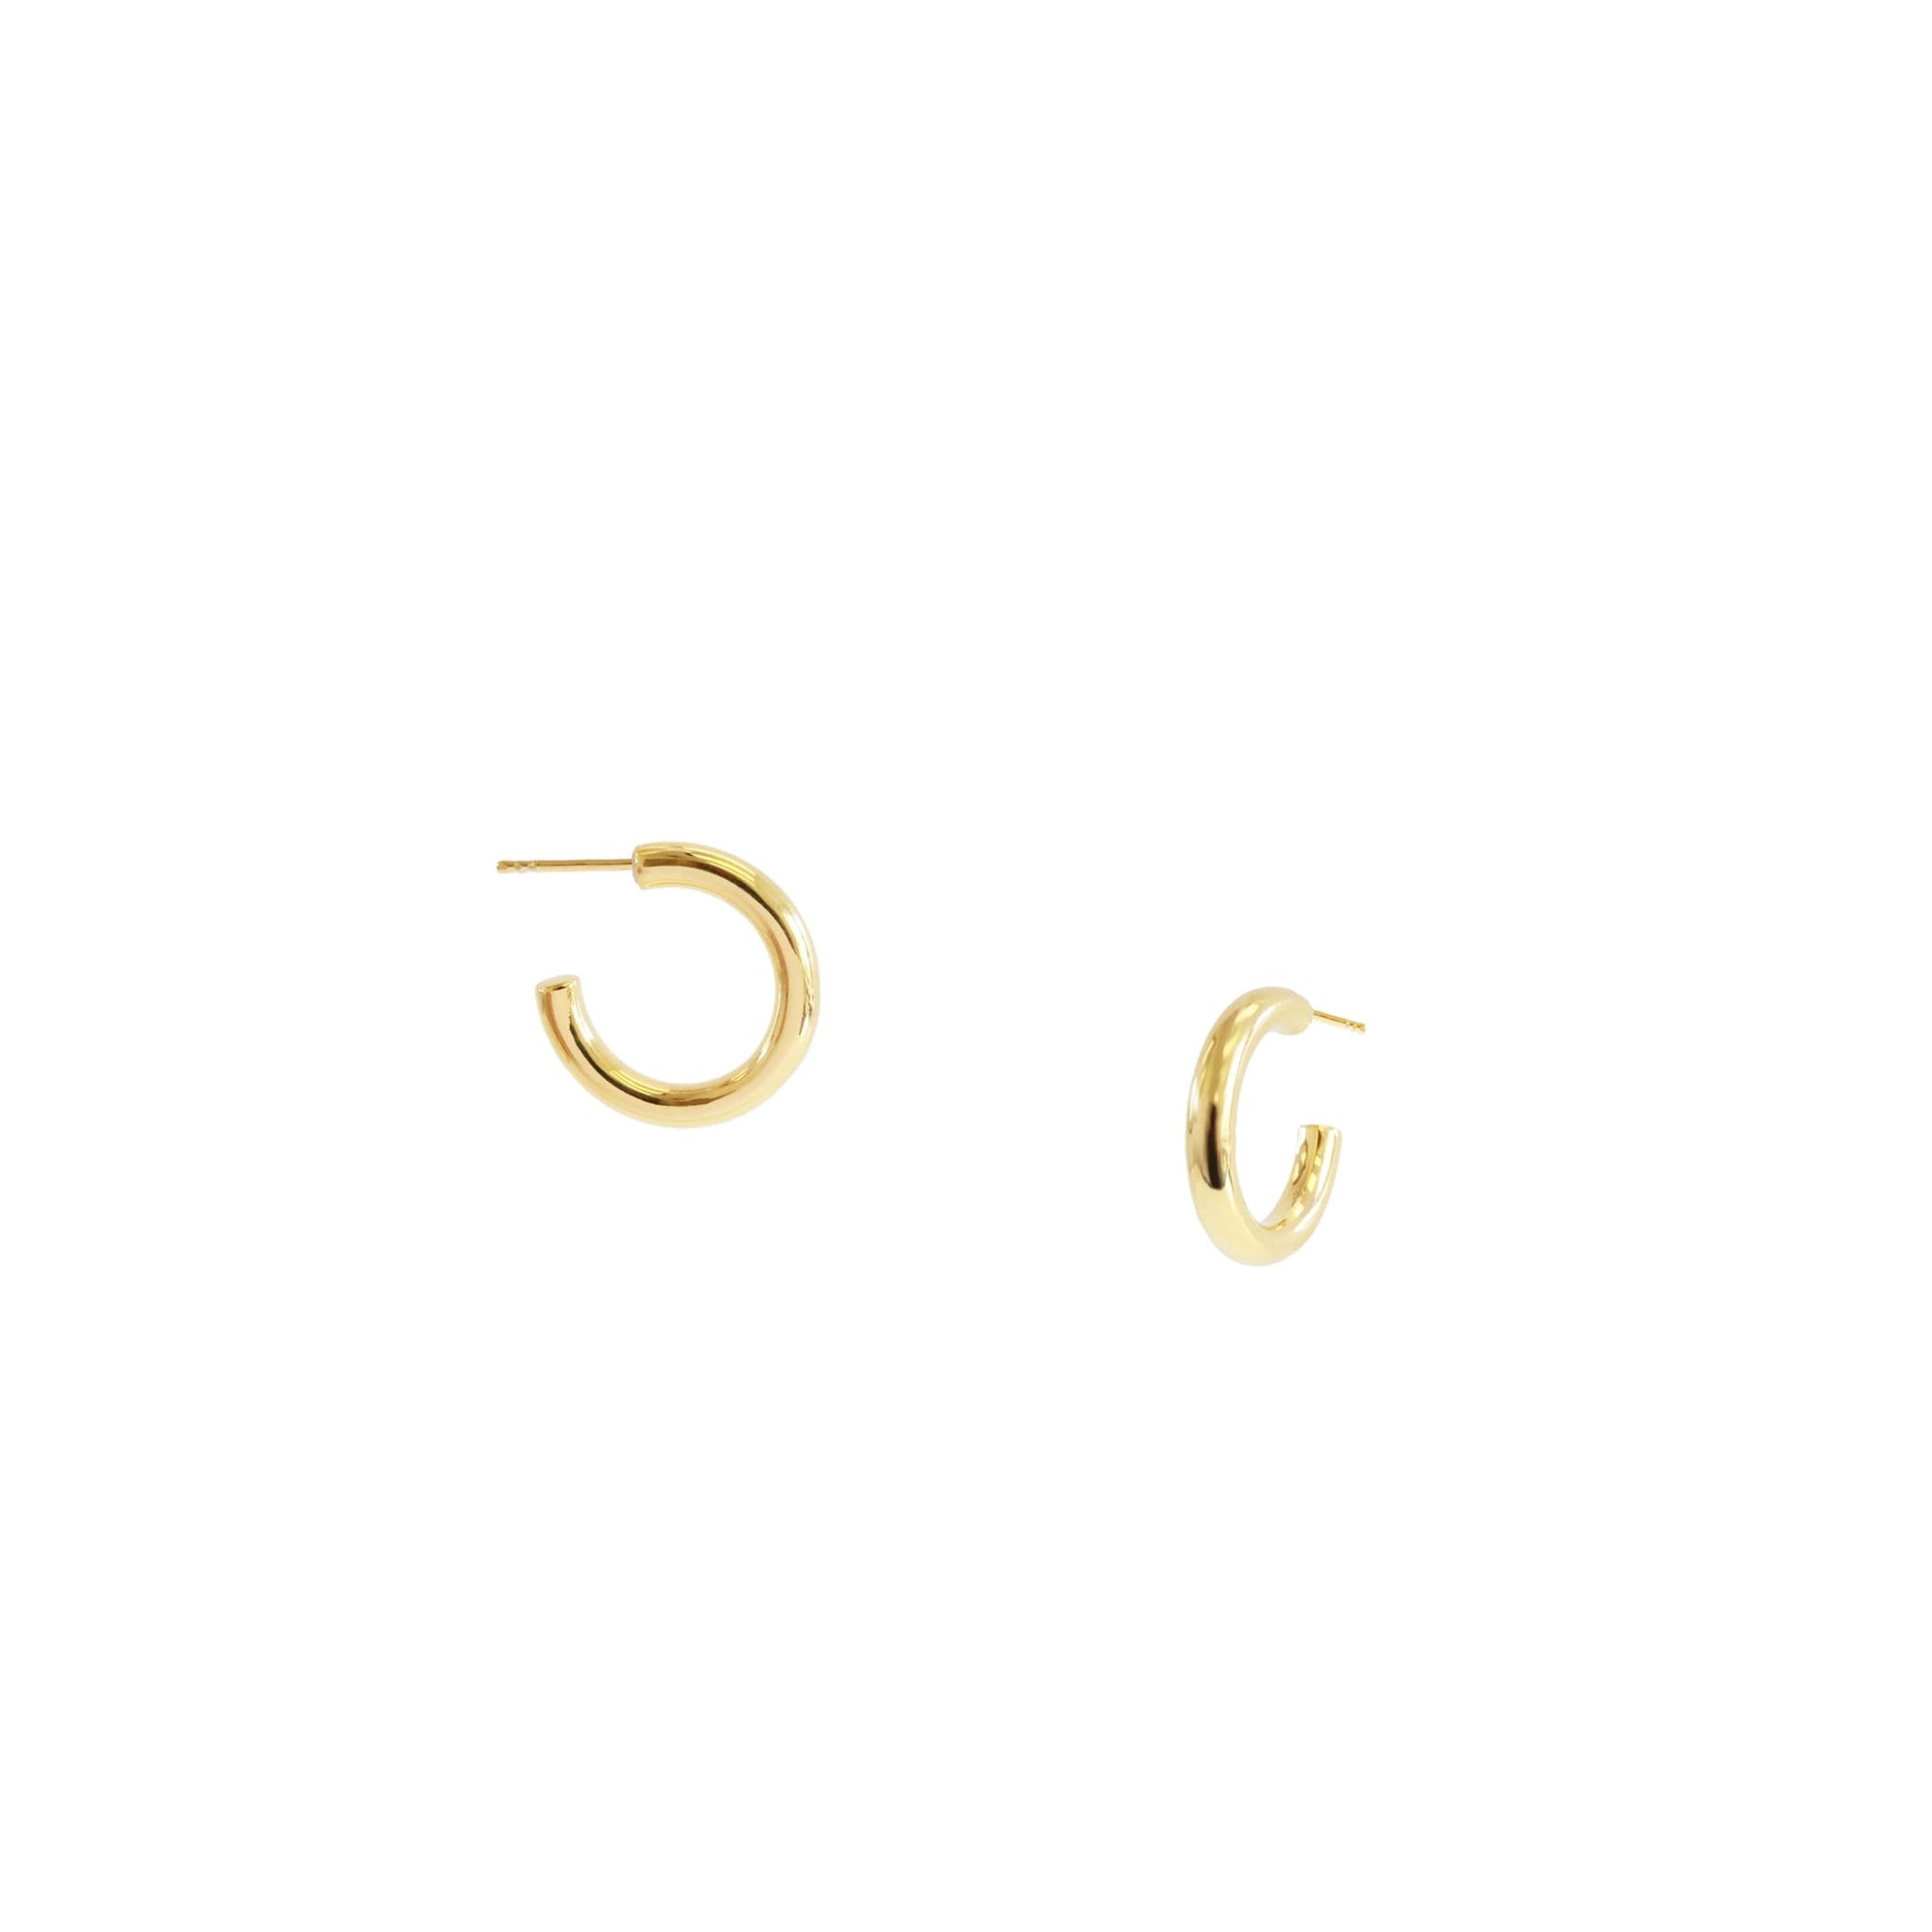 TINY POISE HUGGIE HOOPS - GOLD - SHIP NOV 1st - SO PRETTY CARA COTTER